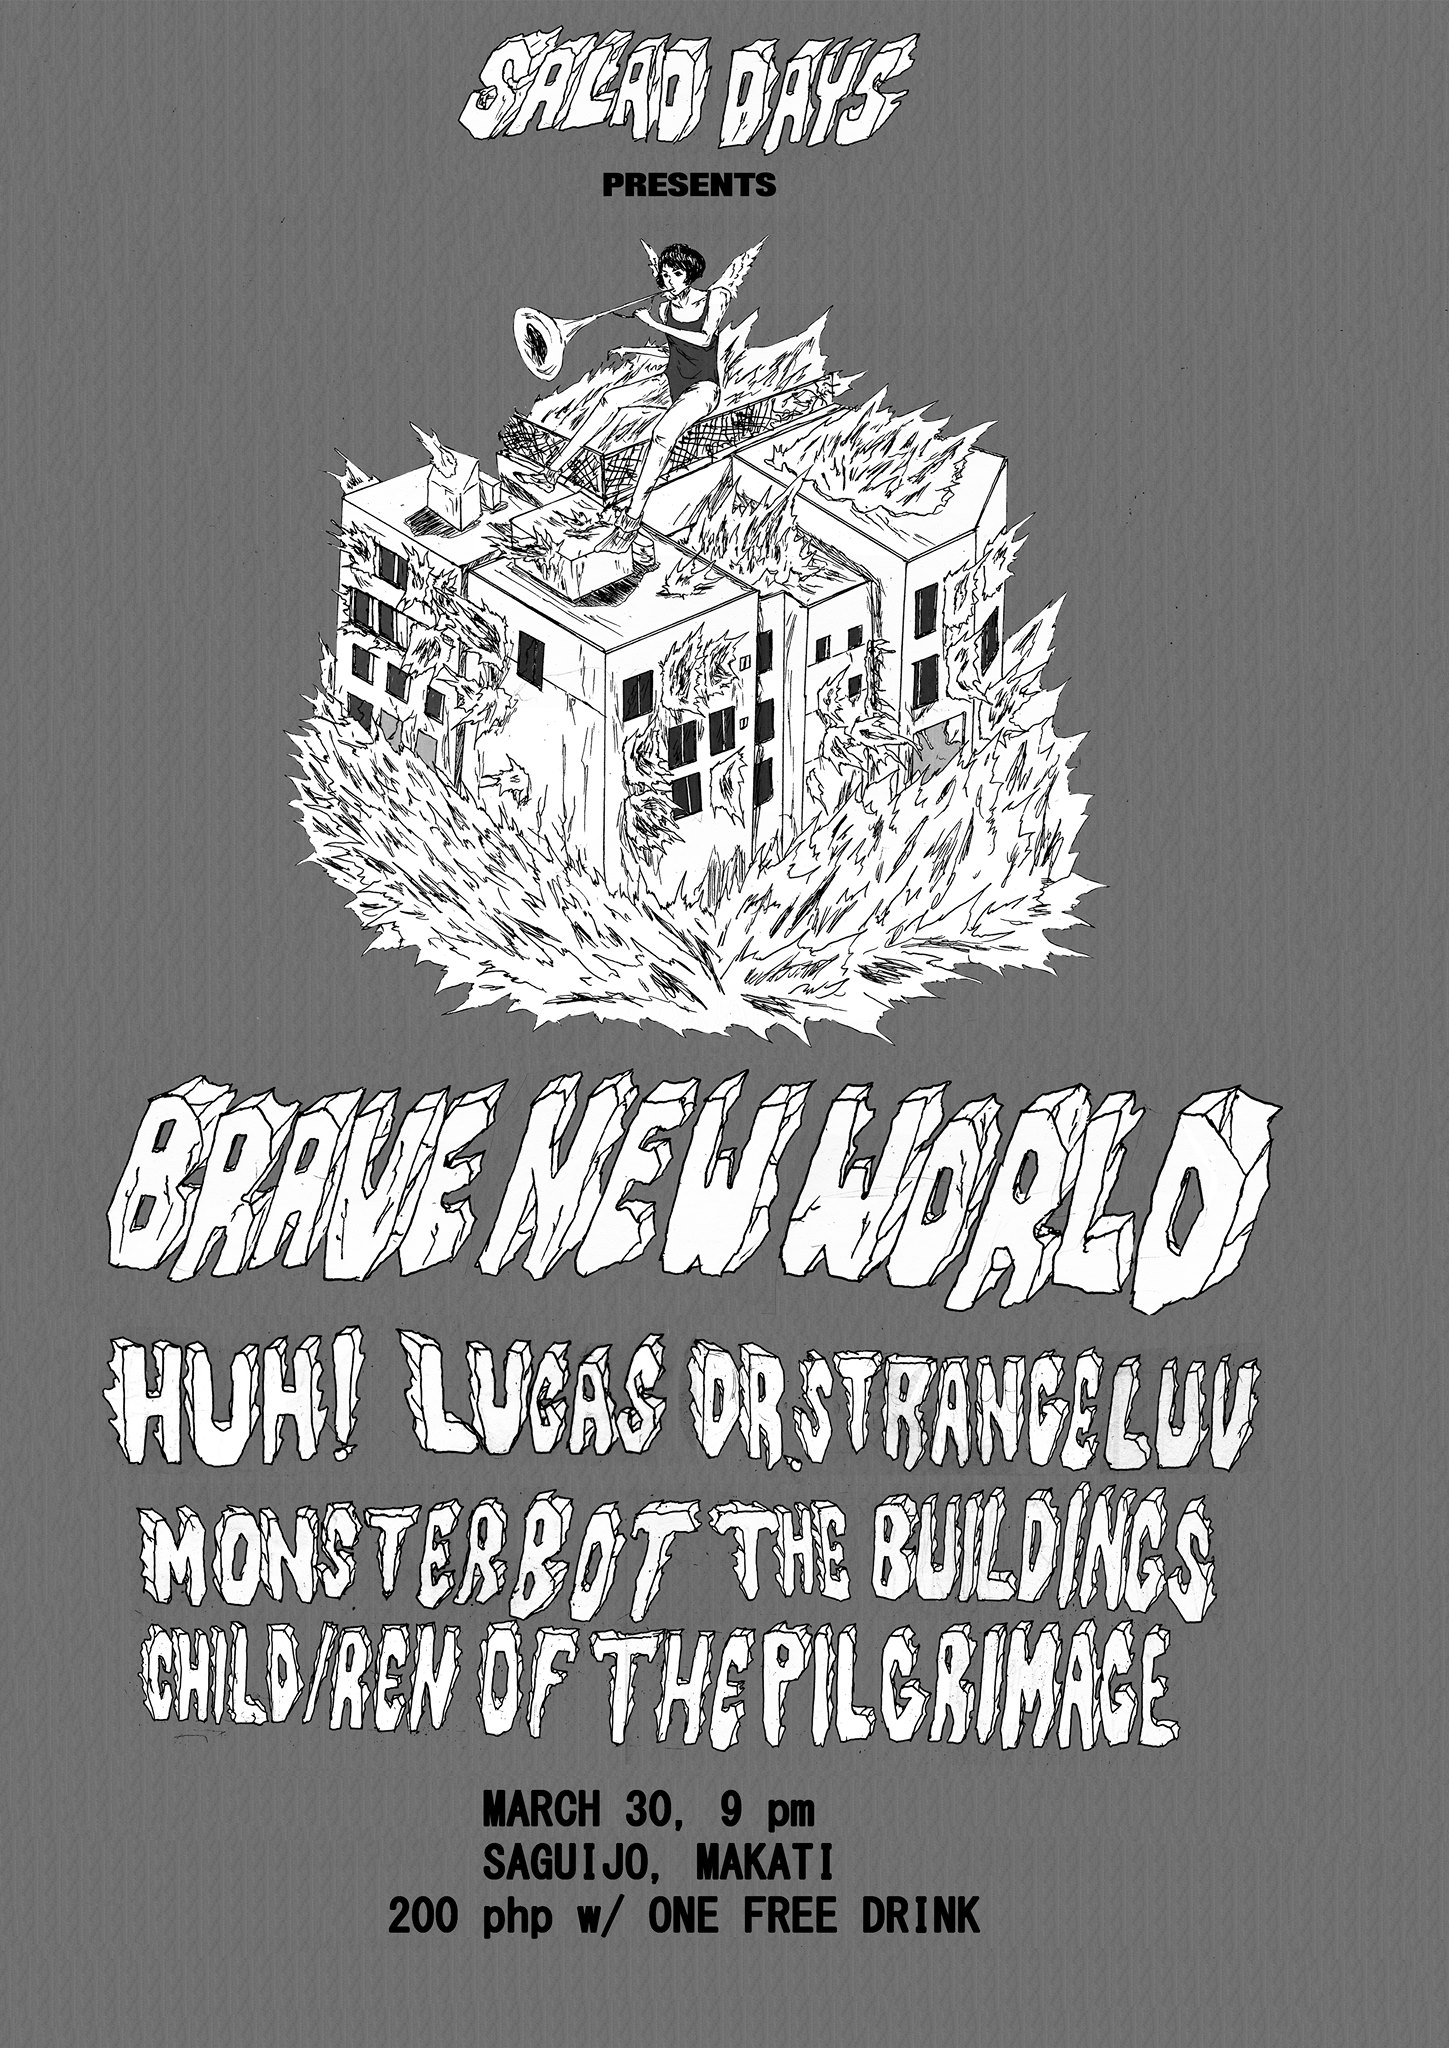 SALAD DAYS presents: Brave New World clock Today at 9 PM Starts in about 18 hours · 79° Mostly Cloudy pin Show Map SaGuijo Makati, Philippines SALAD DAYS presents Brave New World with performances by Monsterbot Lucas (from Davao) Dr. Strangeluv The Buildings Child/ren of the Pilgrimage and The first gig of HUH! in over a decade! March 30, 2016 Saguijo, Makati 9pm P200 with 1 free drink Poster by Matthew Salazar